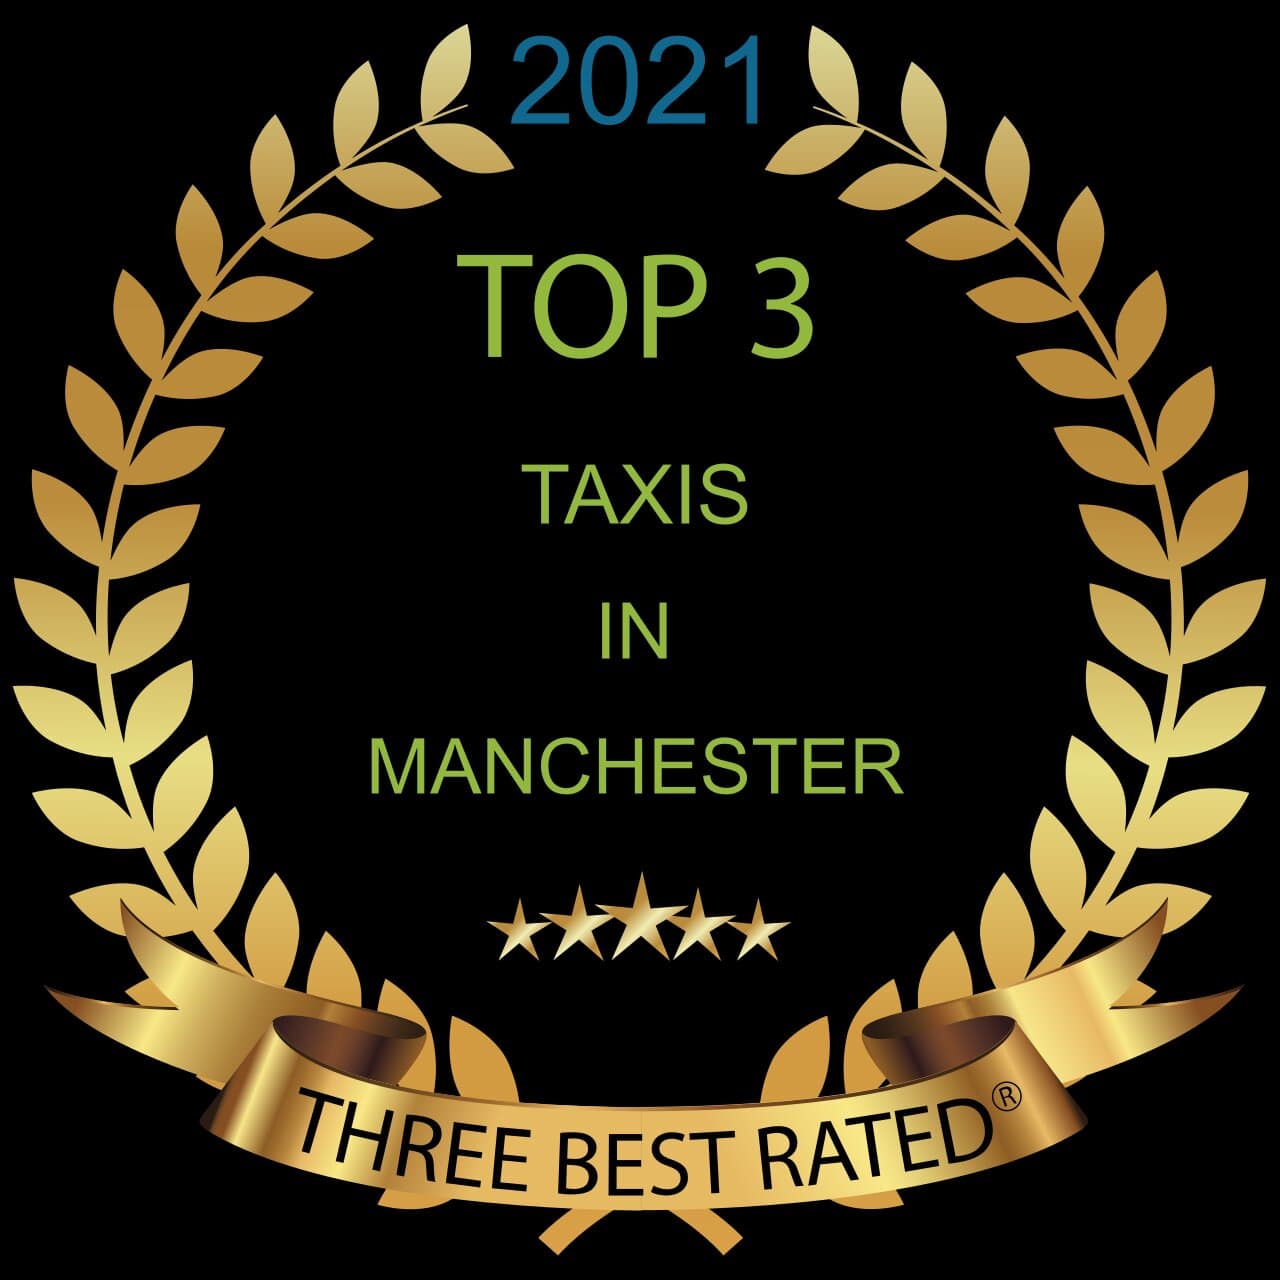 Hale to Manchester Airport Taxi